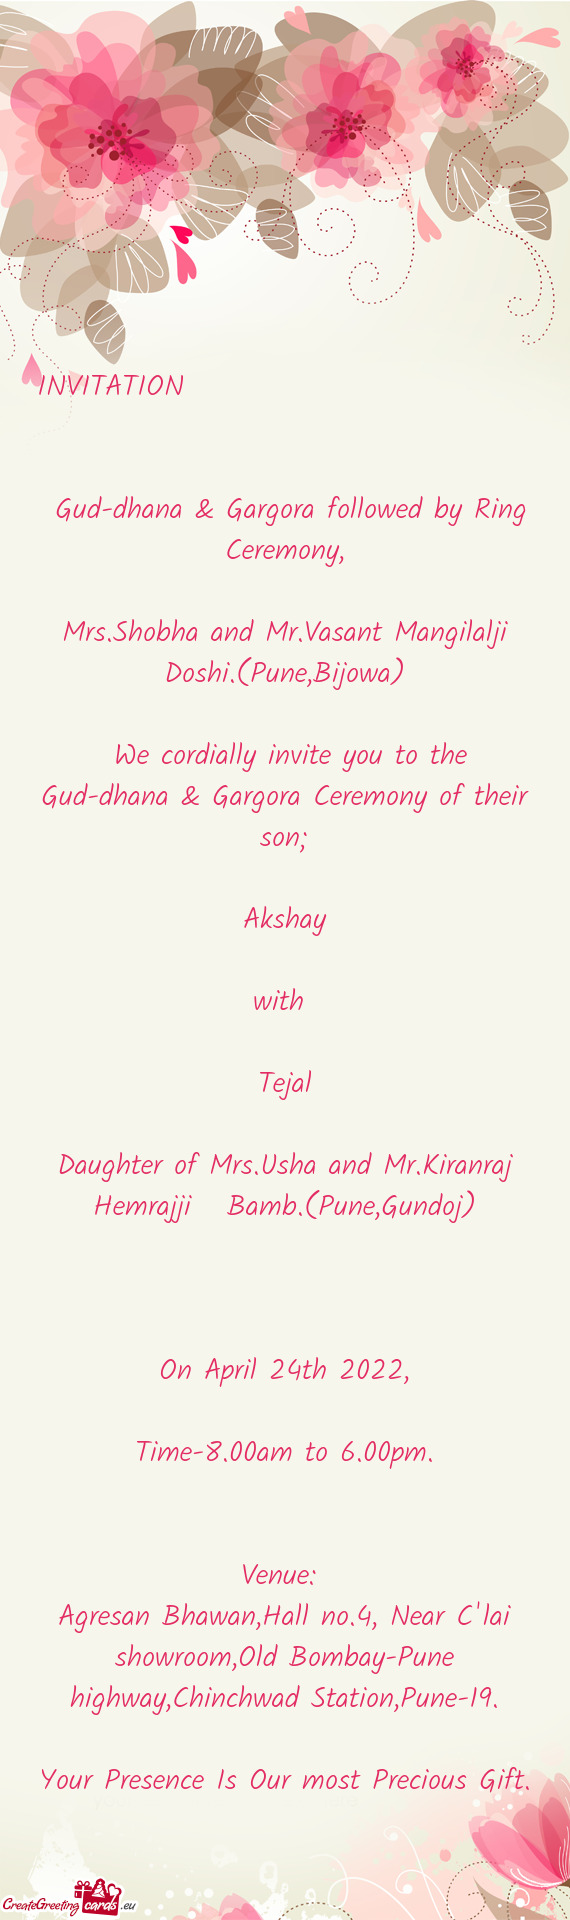 We cordially invite you to the Gud-dhana & Gargora Ceremony of their son;